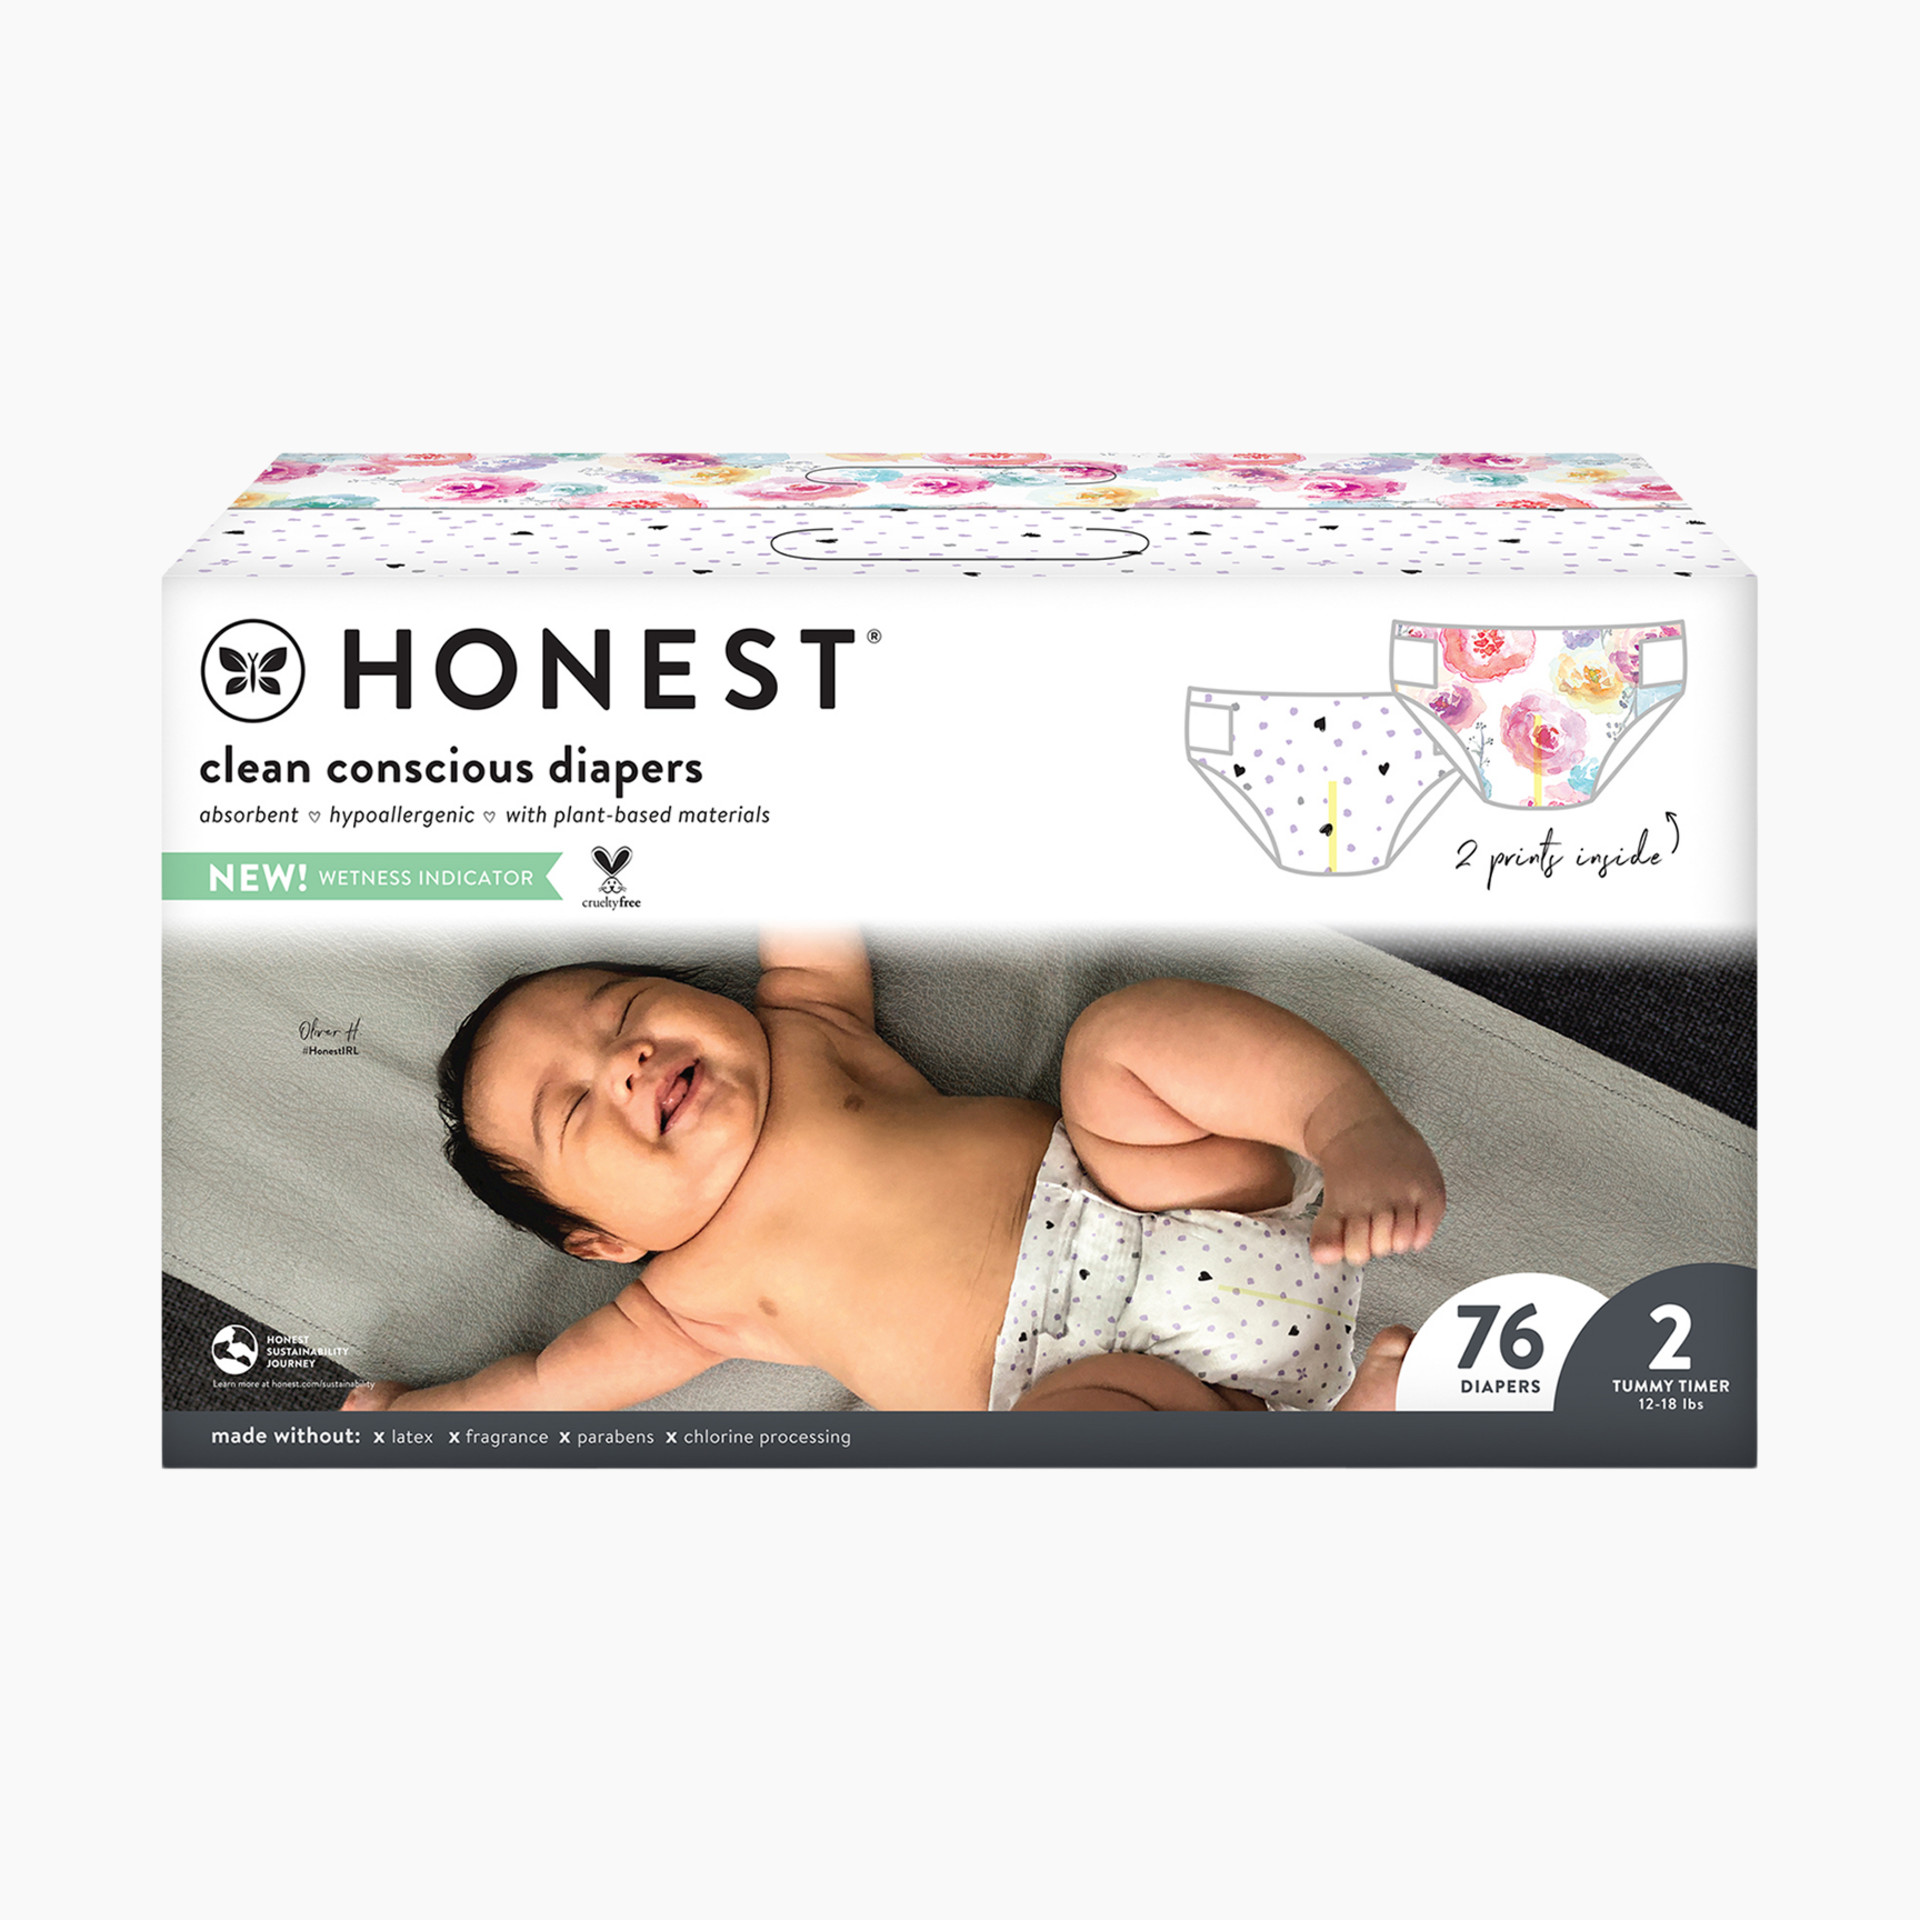 The Honest Company Club Box Diapers - Young At Heart + Rose